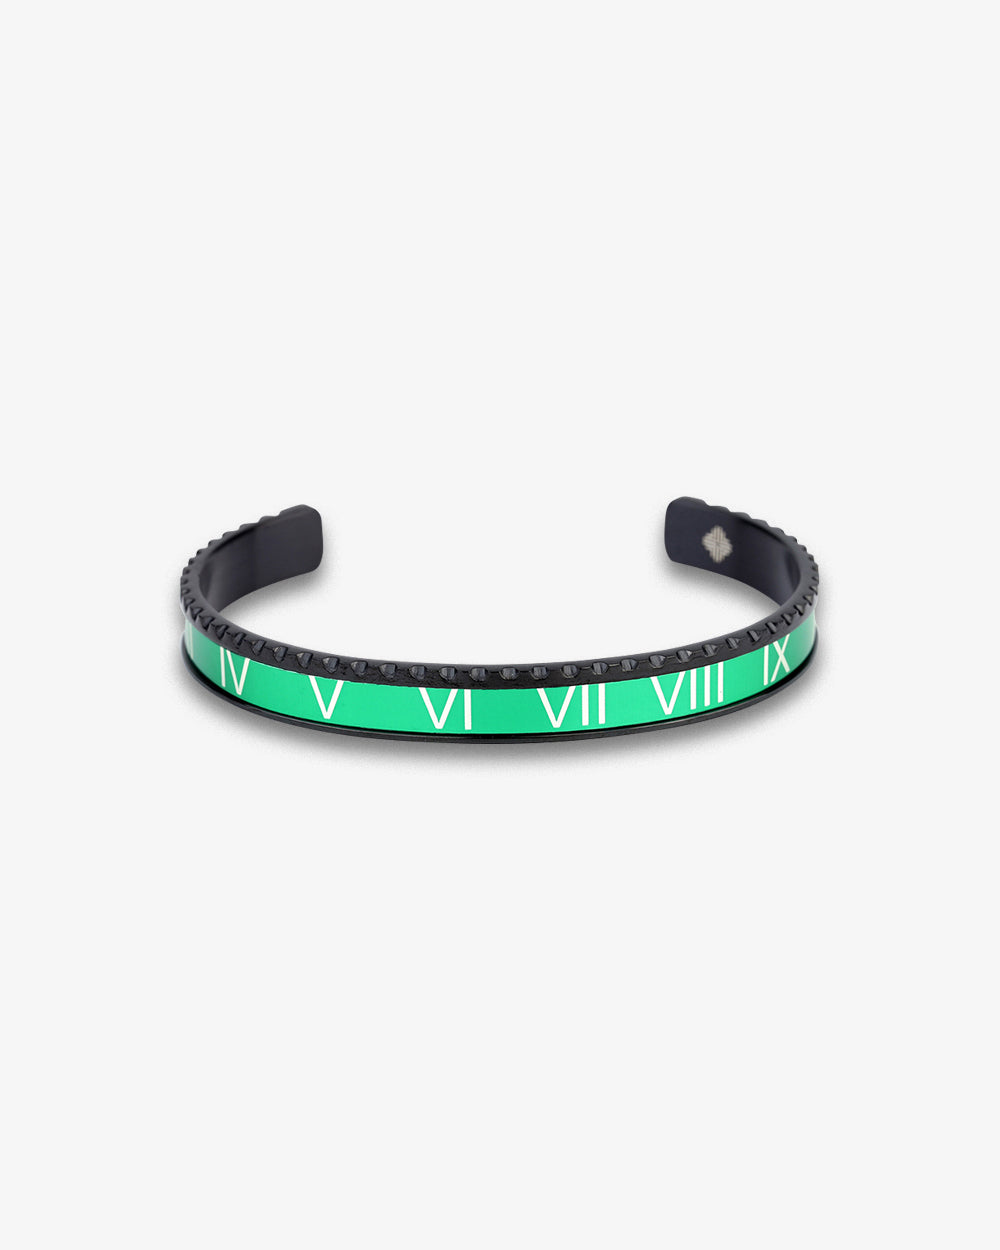 Swiss Concept Classic Roman Numeral Speed Bracelet (Green & Black Gold) - Stainless Steel